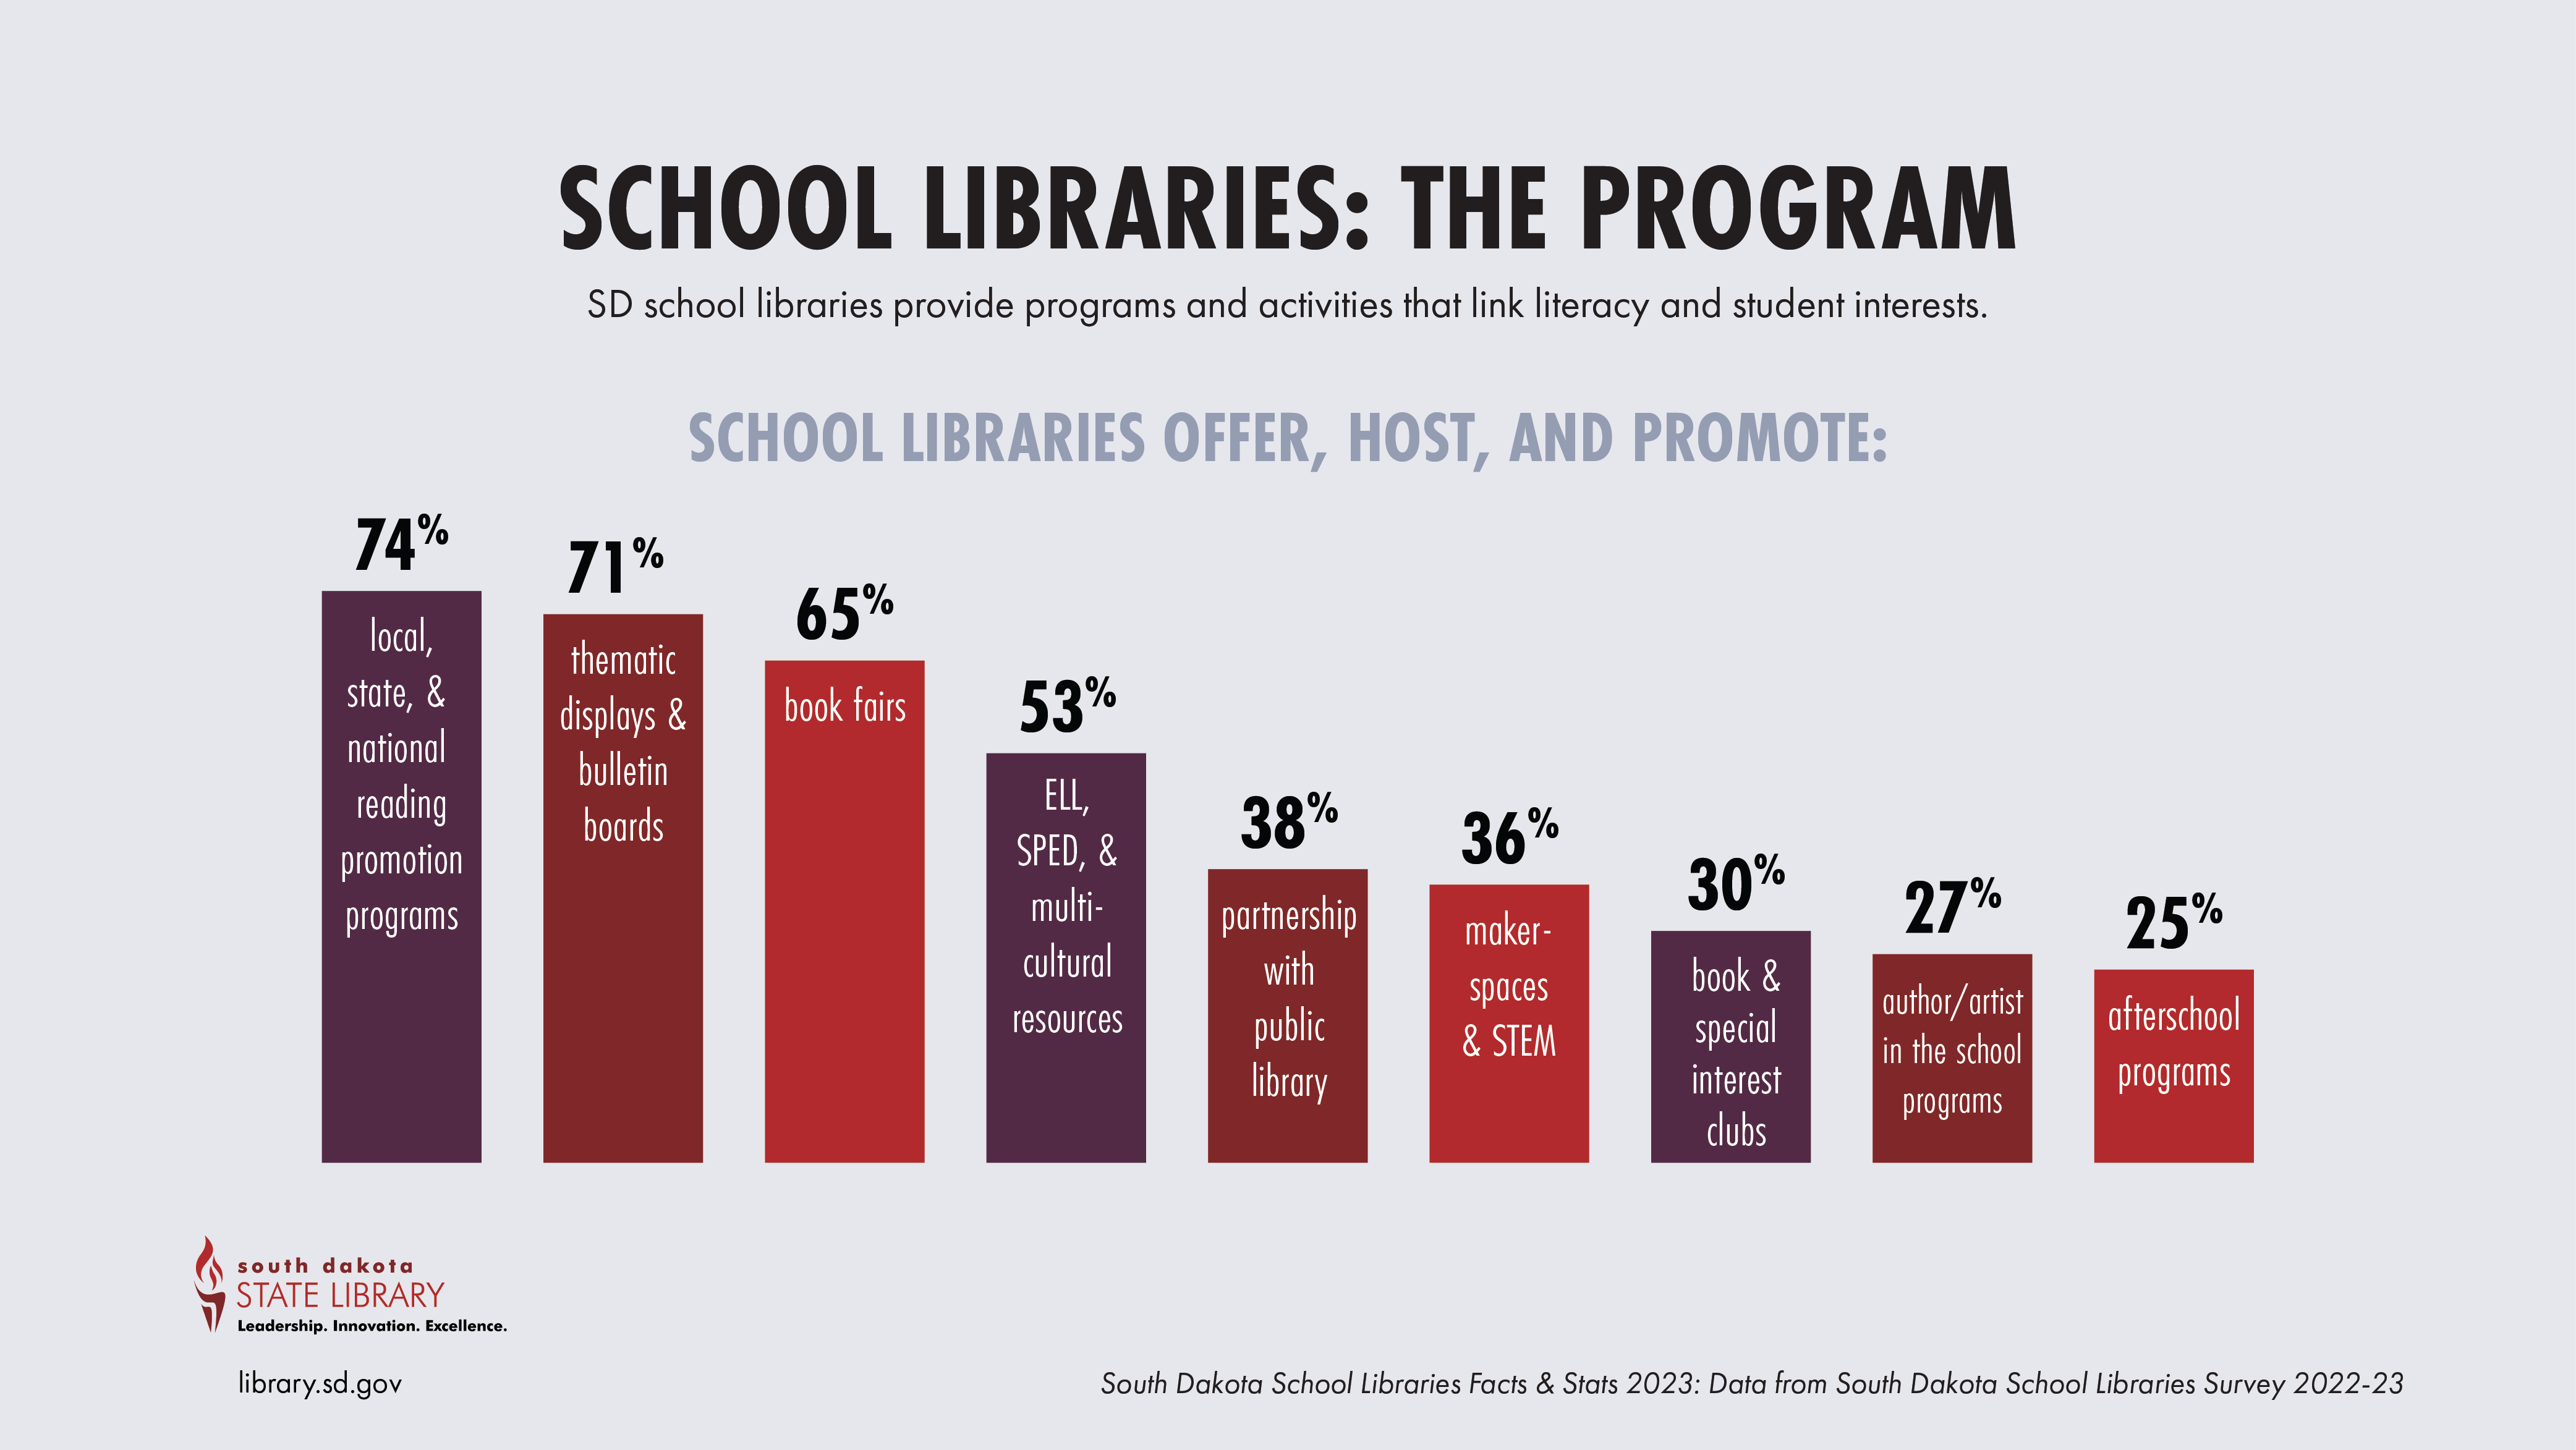 school libraries offer, host, and promote programs and activities that link literacy and student interests